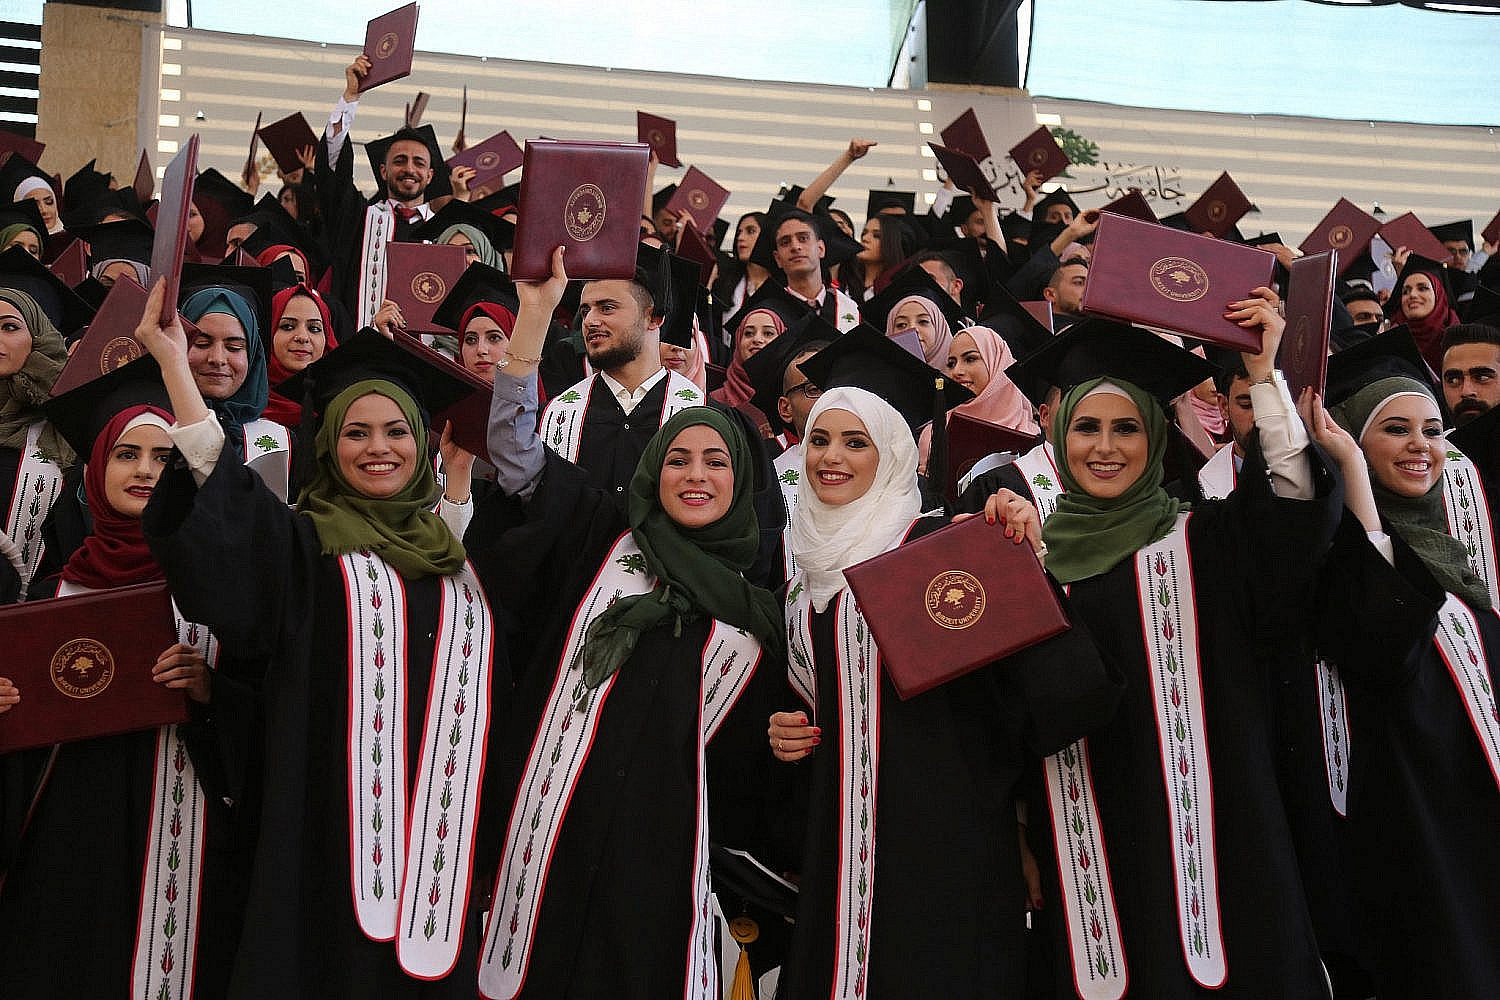 Palestinian students attend their graduation ceremony at the end of the academic year at Birzeit University in the West Bank town of Birzeit, near Ramallah, July 2, 2017. (Flash90)